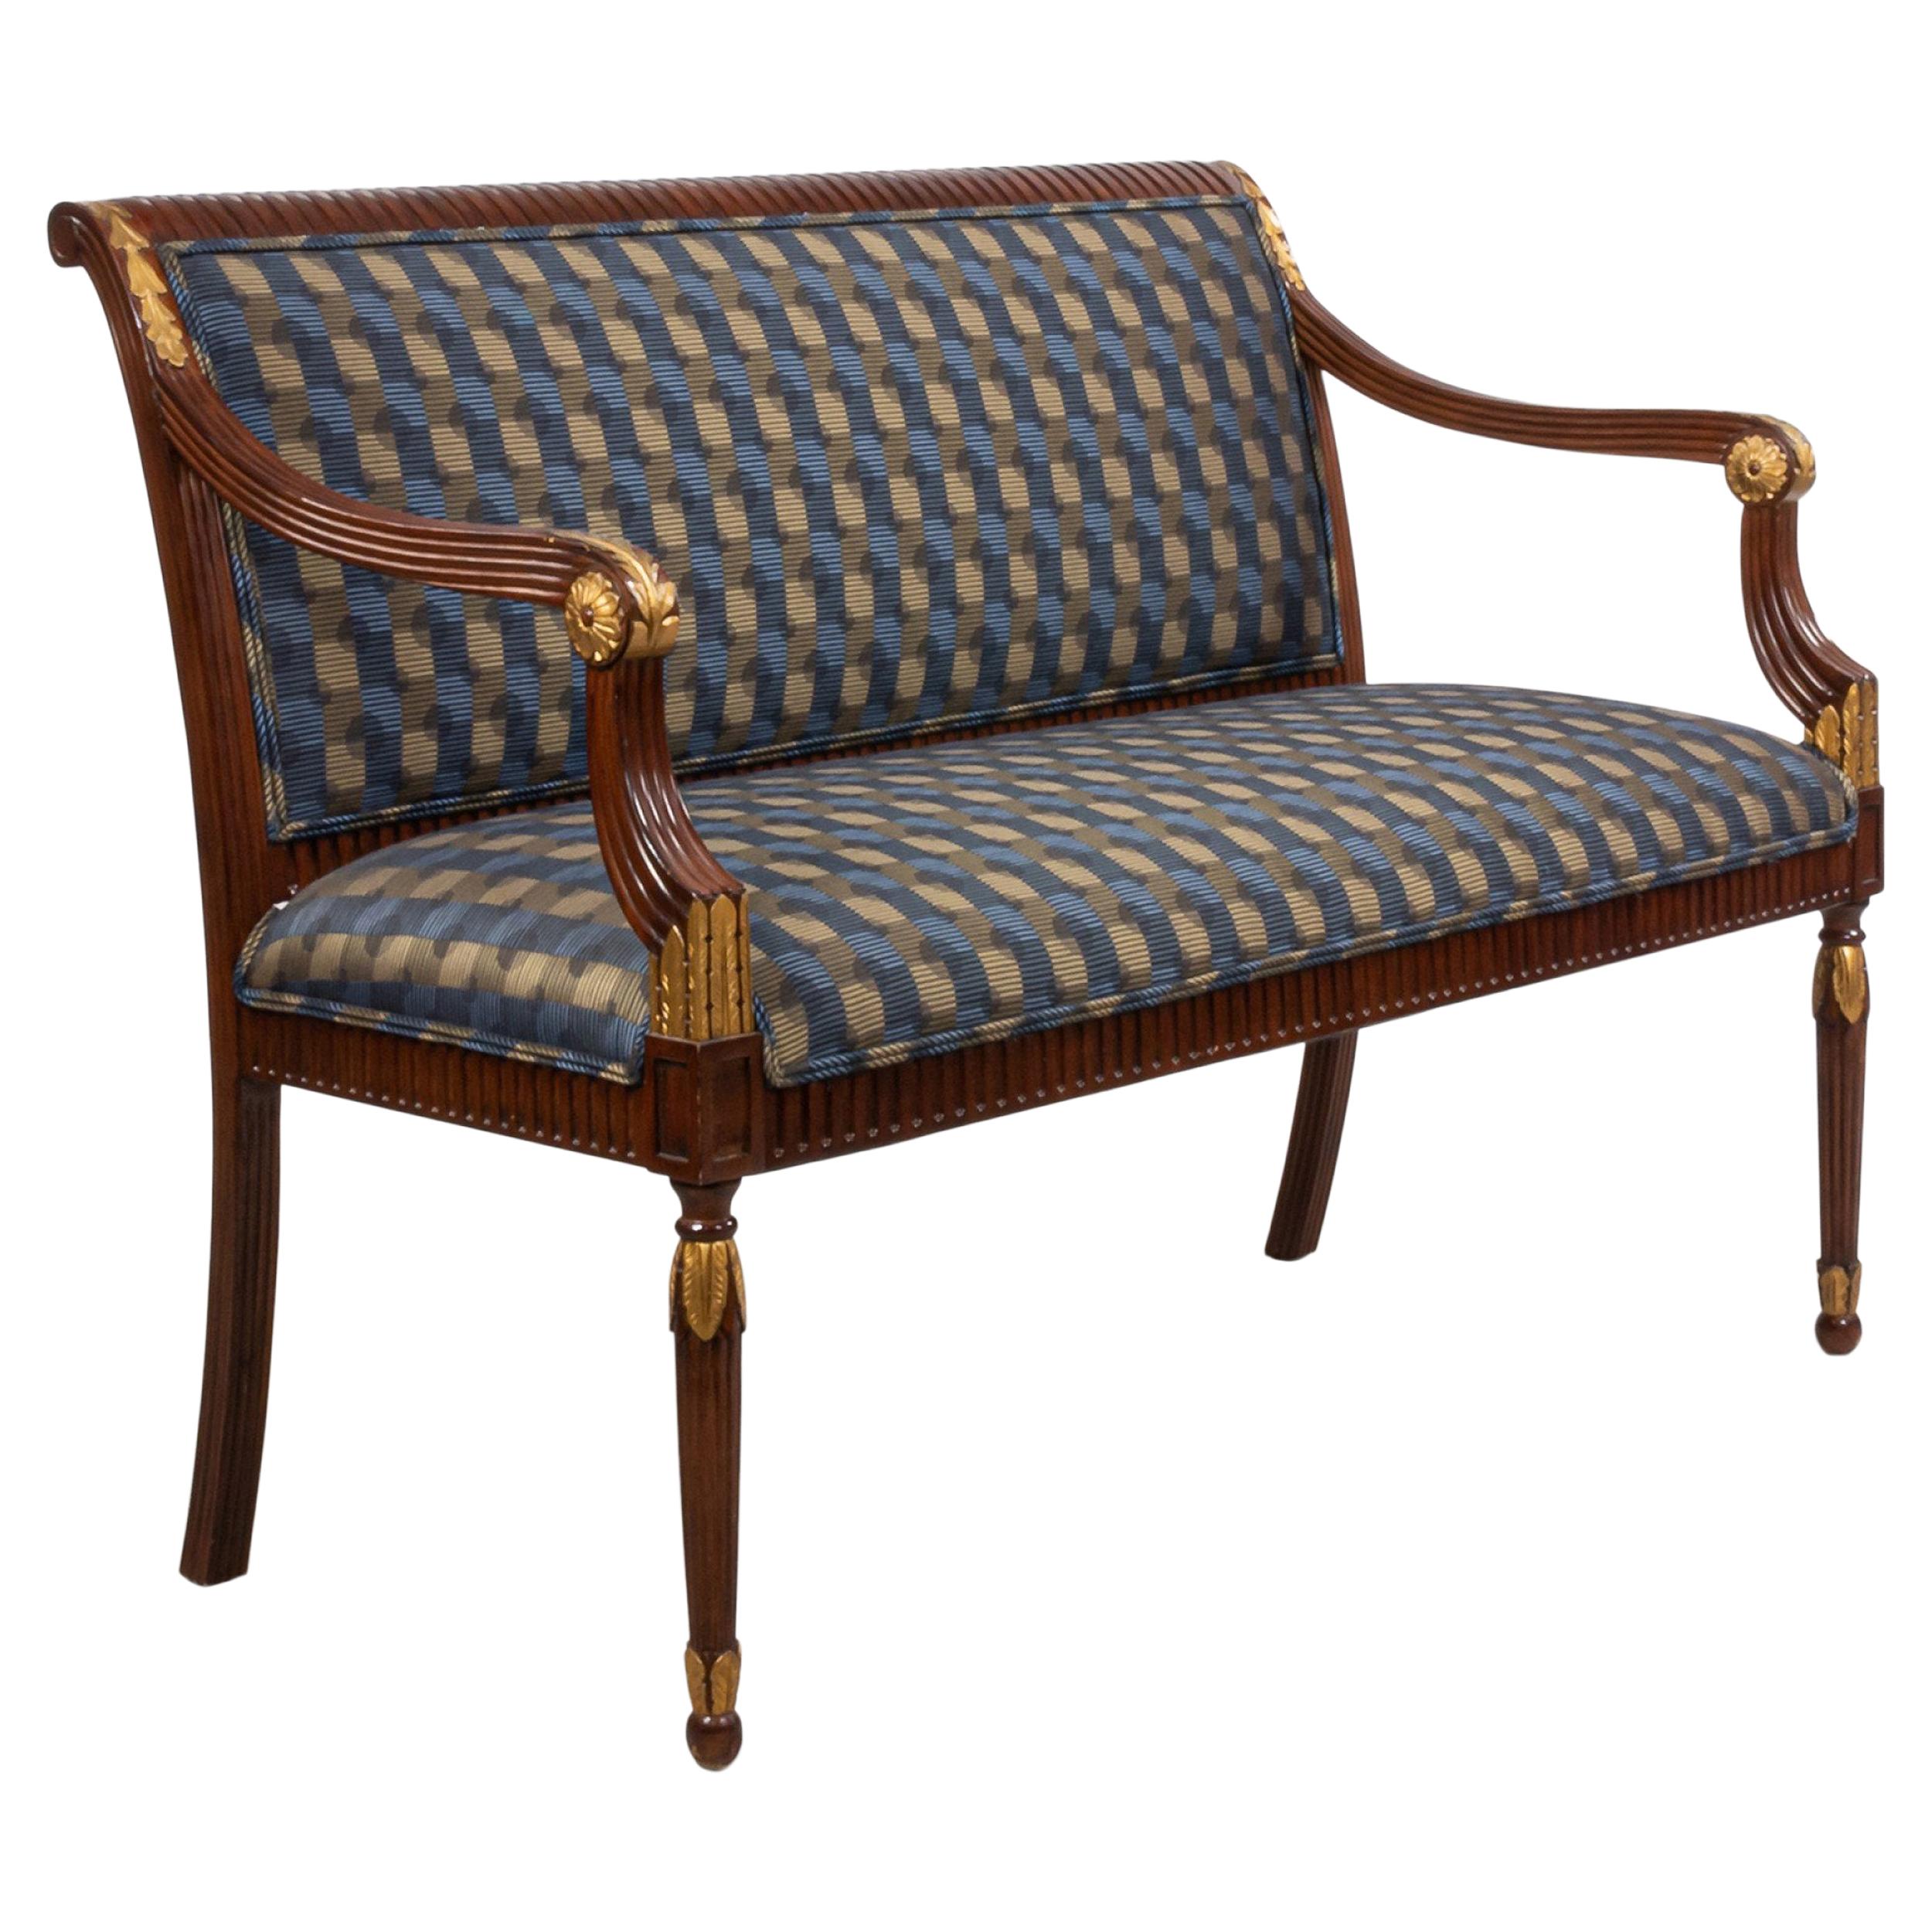 French Louis XVI Style Mahogany Settee with Blue Patterned Upholstery